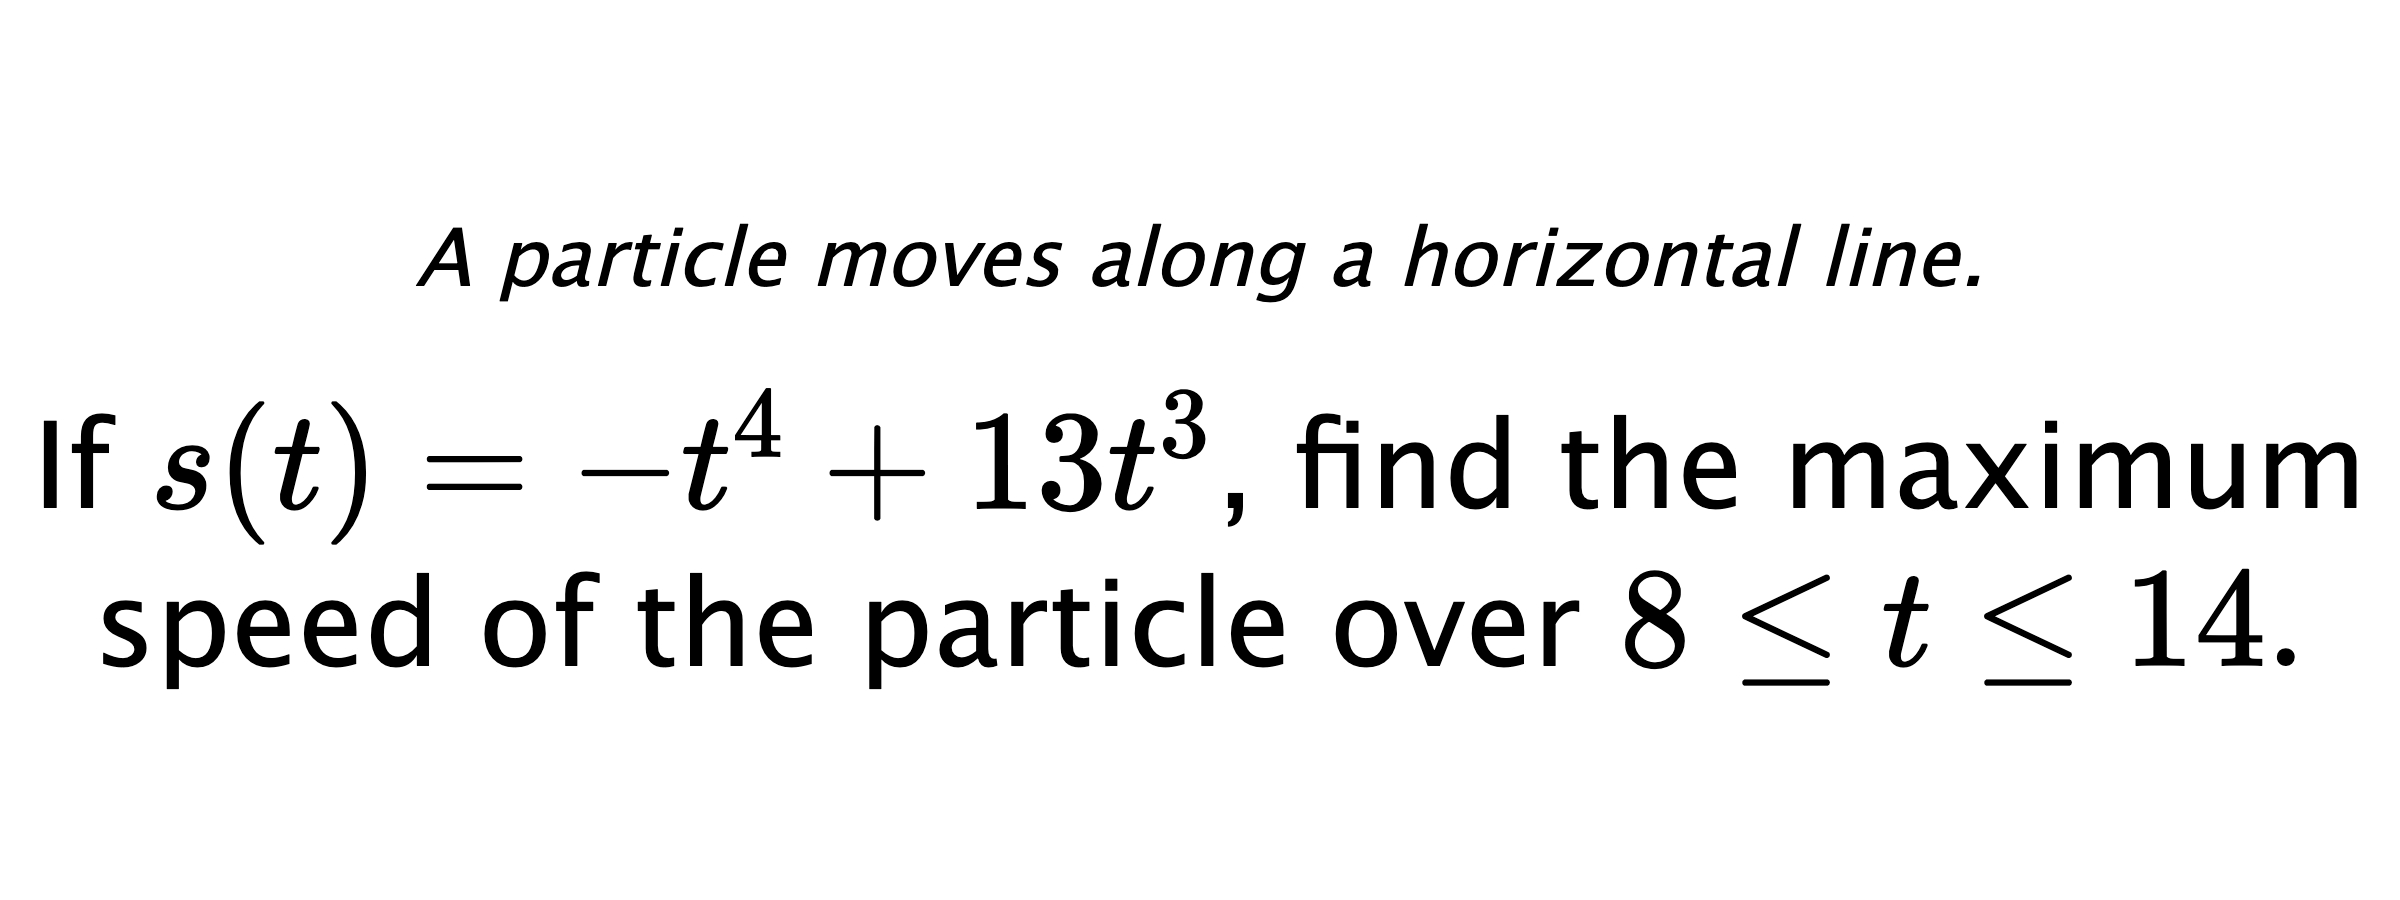 A particle moves along a horizontal line. If $ s(t)=-t^4+13t^3 $, find the maximum speed of the particle over $ 8 \leq t \leq 14 .$